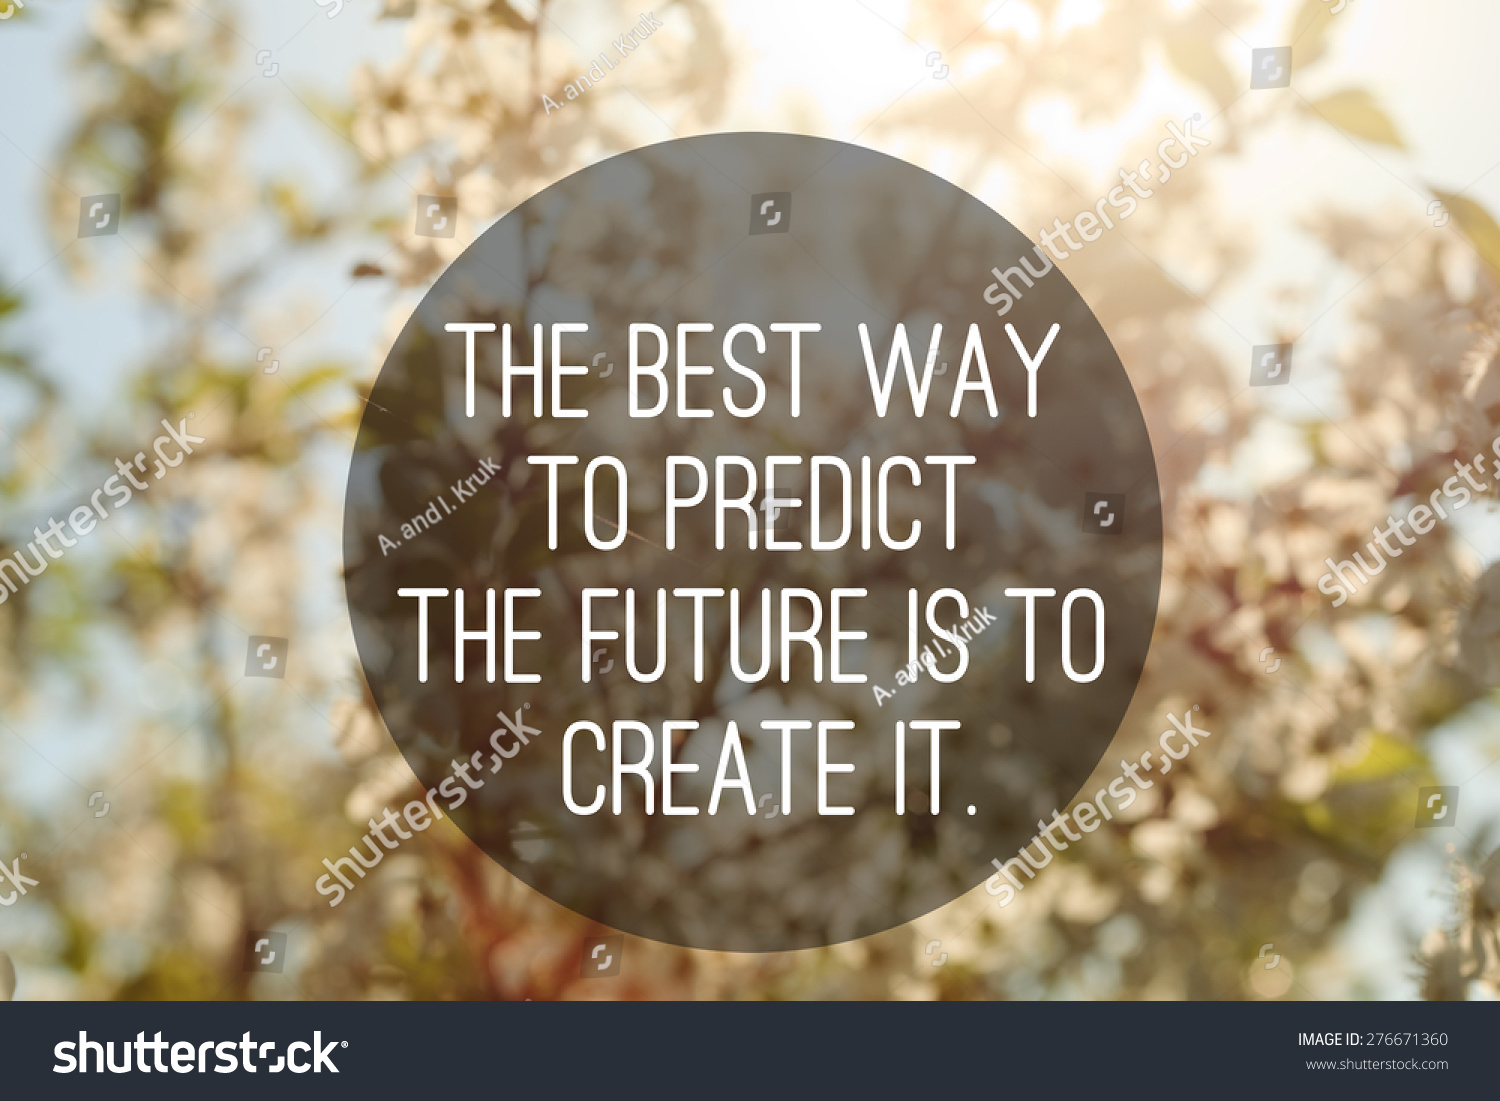 motivational quote to create future on nature abstract background #276671360